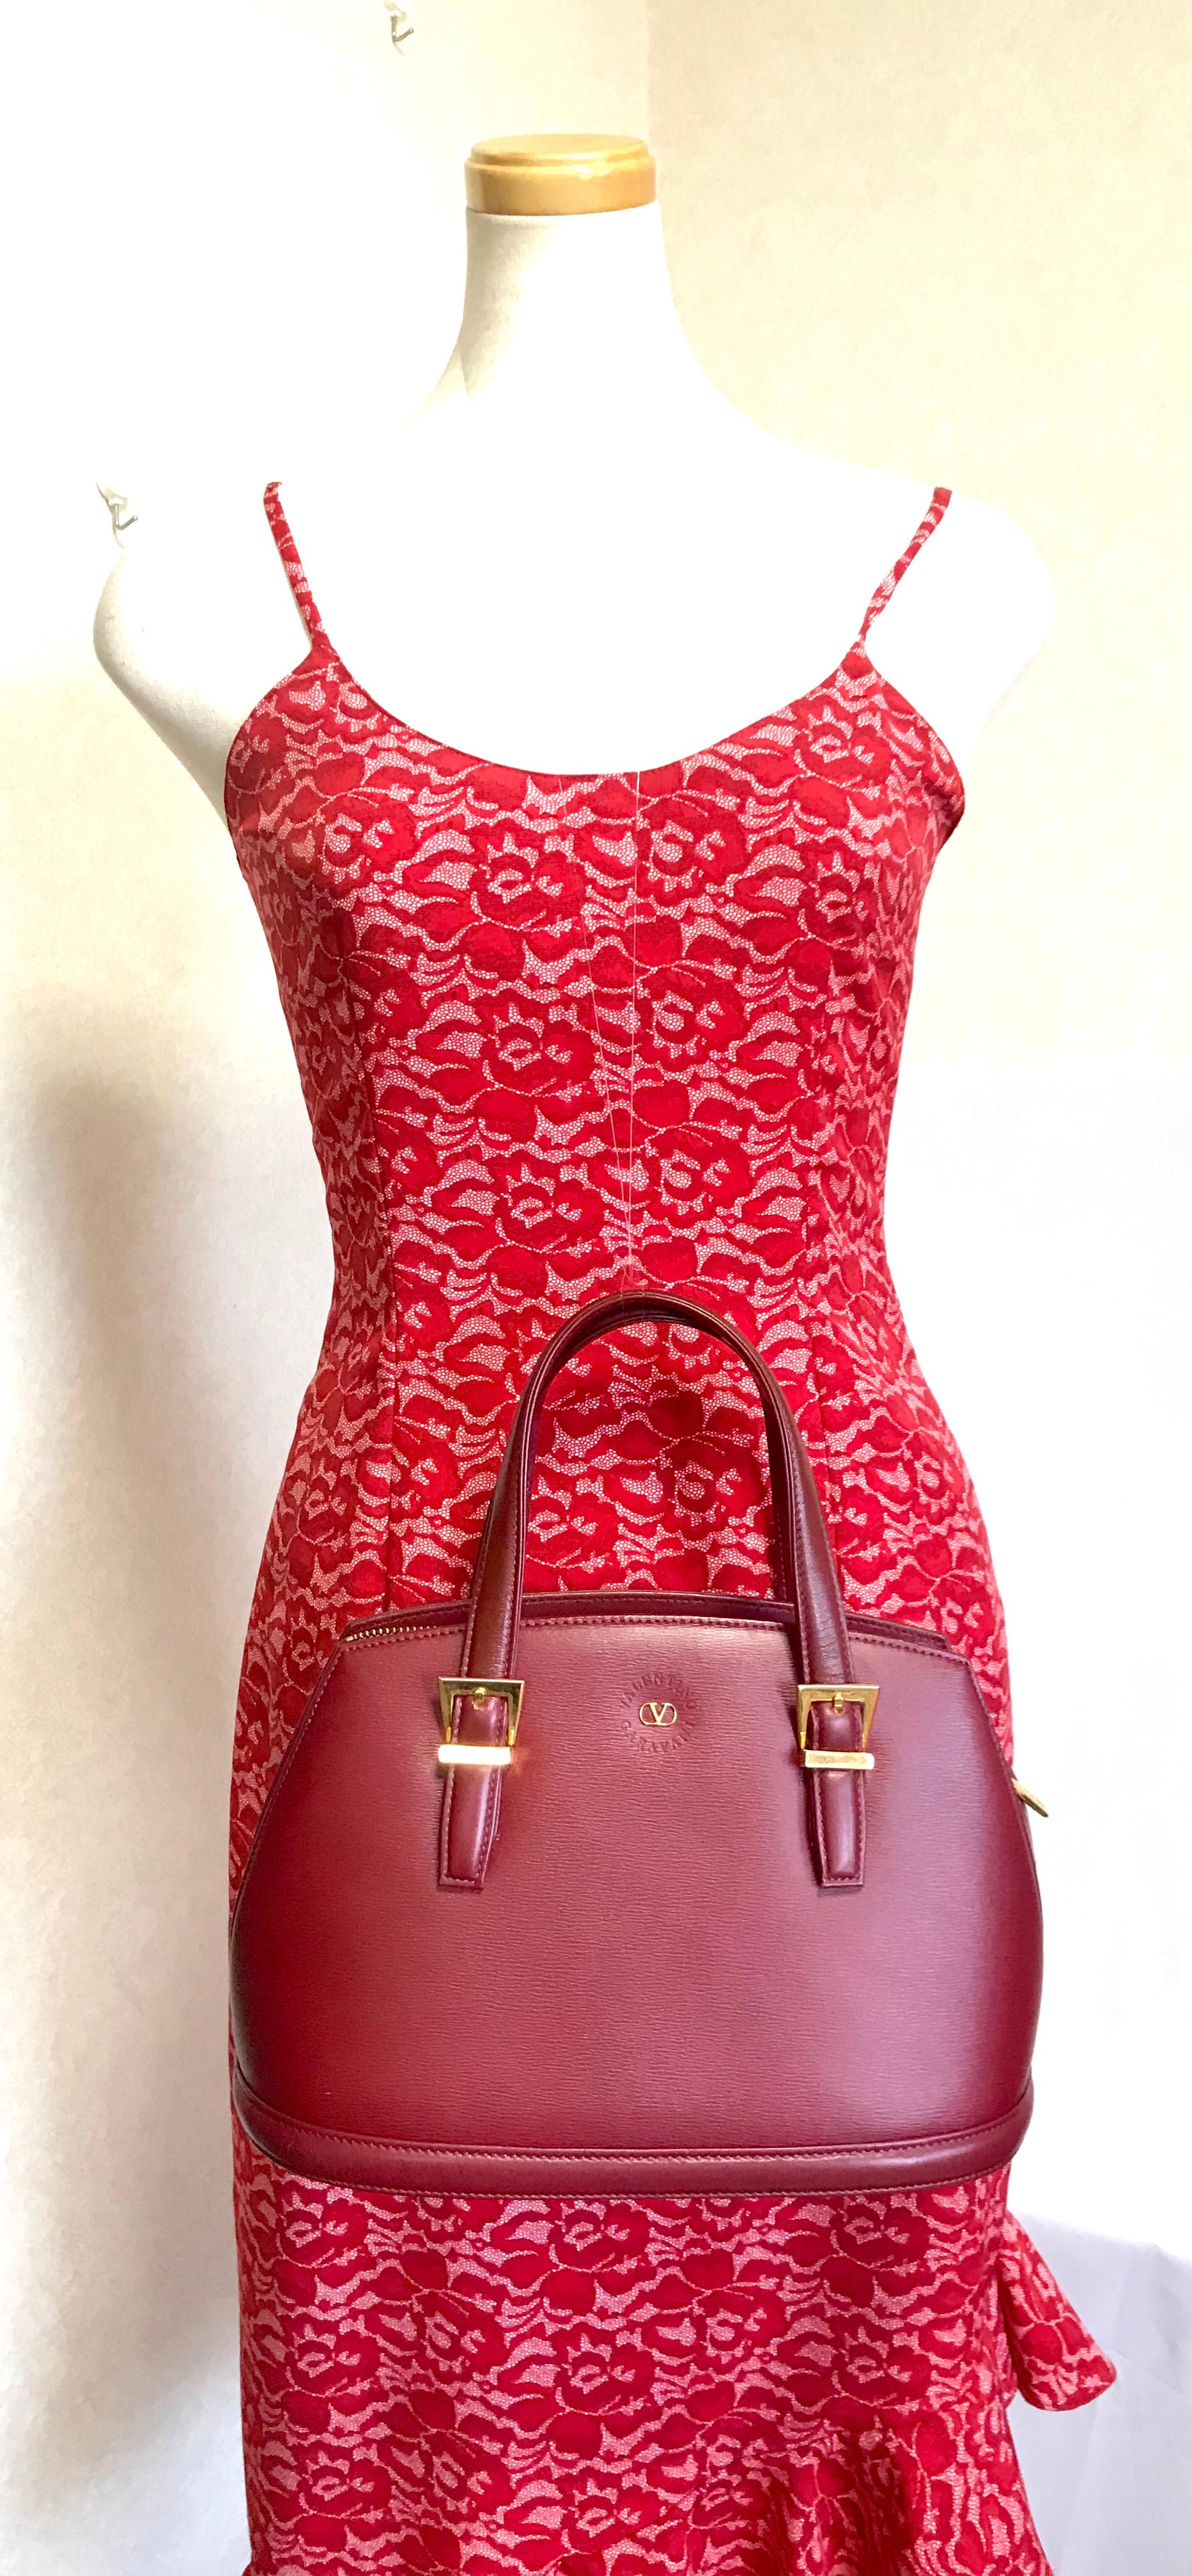 1990s. Vintage Valentino Garavani wine leather handbag with golden buckles. Classic Valentino purse for any occasions.

This is the vintage Valentino Garavani wine/bordeaux leather purse from 90's.
Classic style that fits any occasions such as